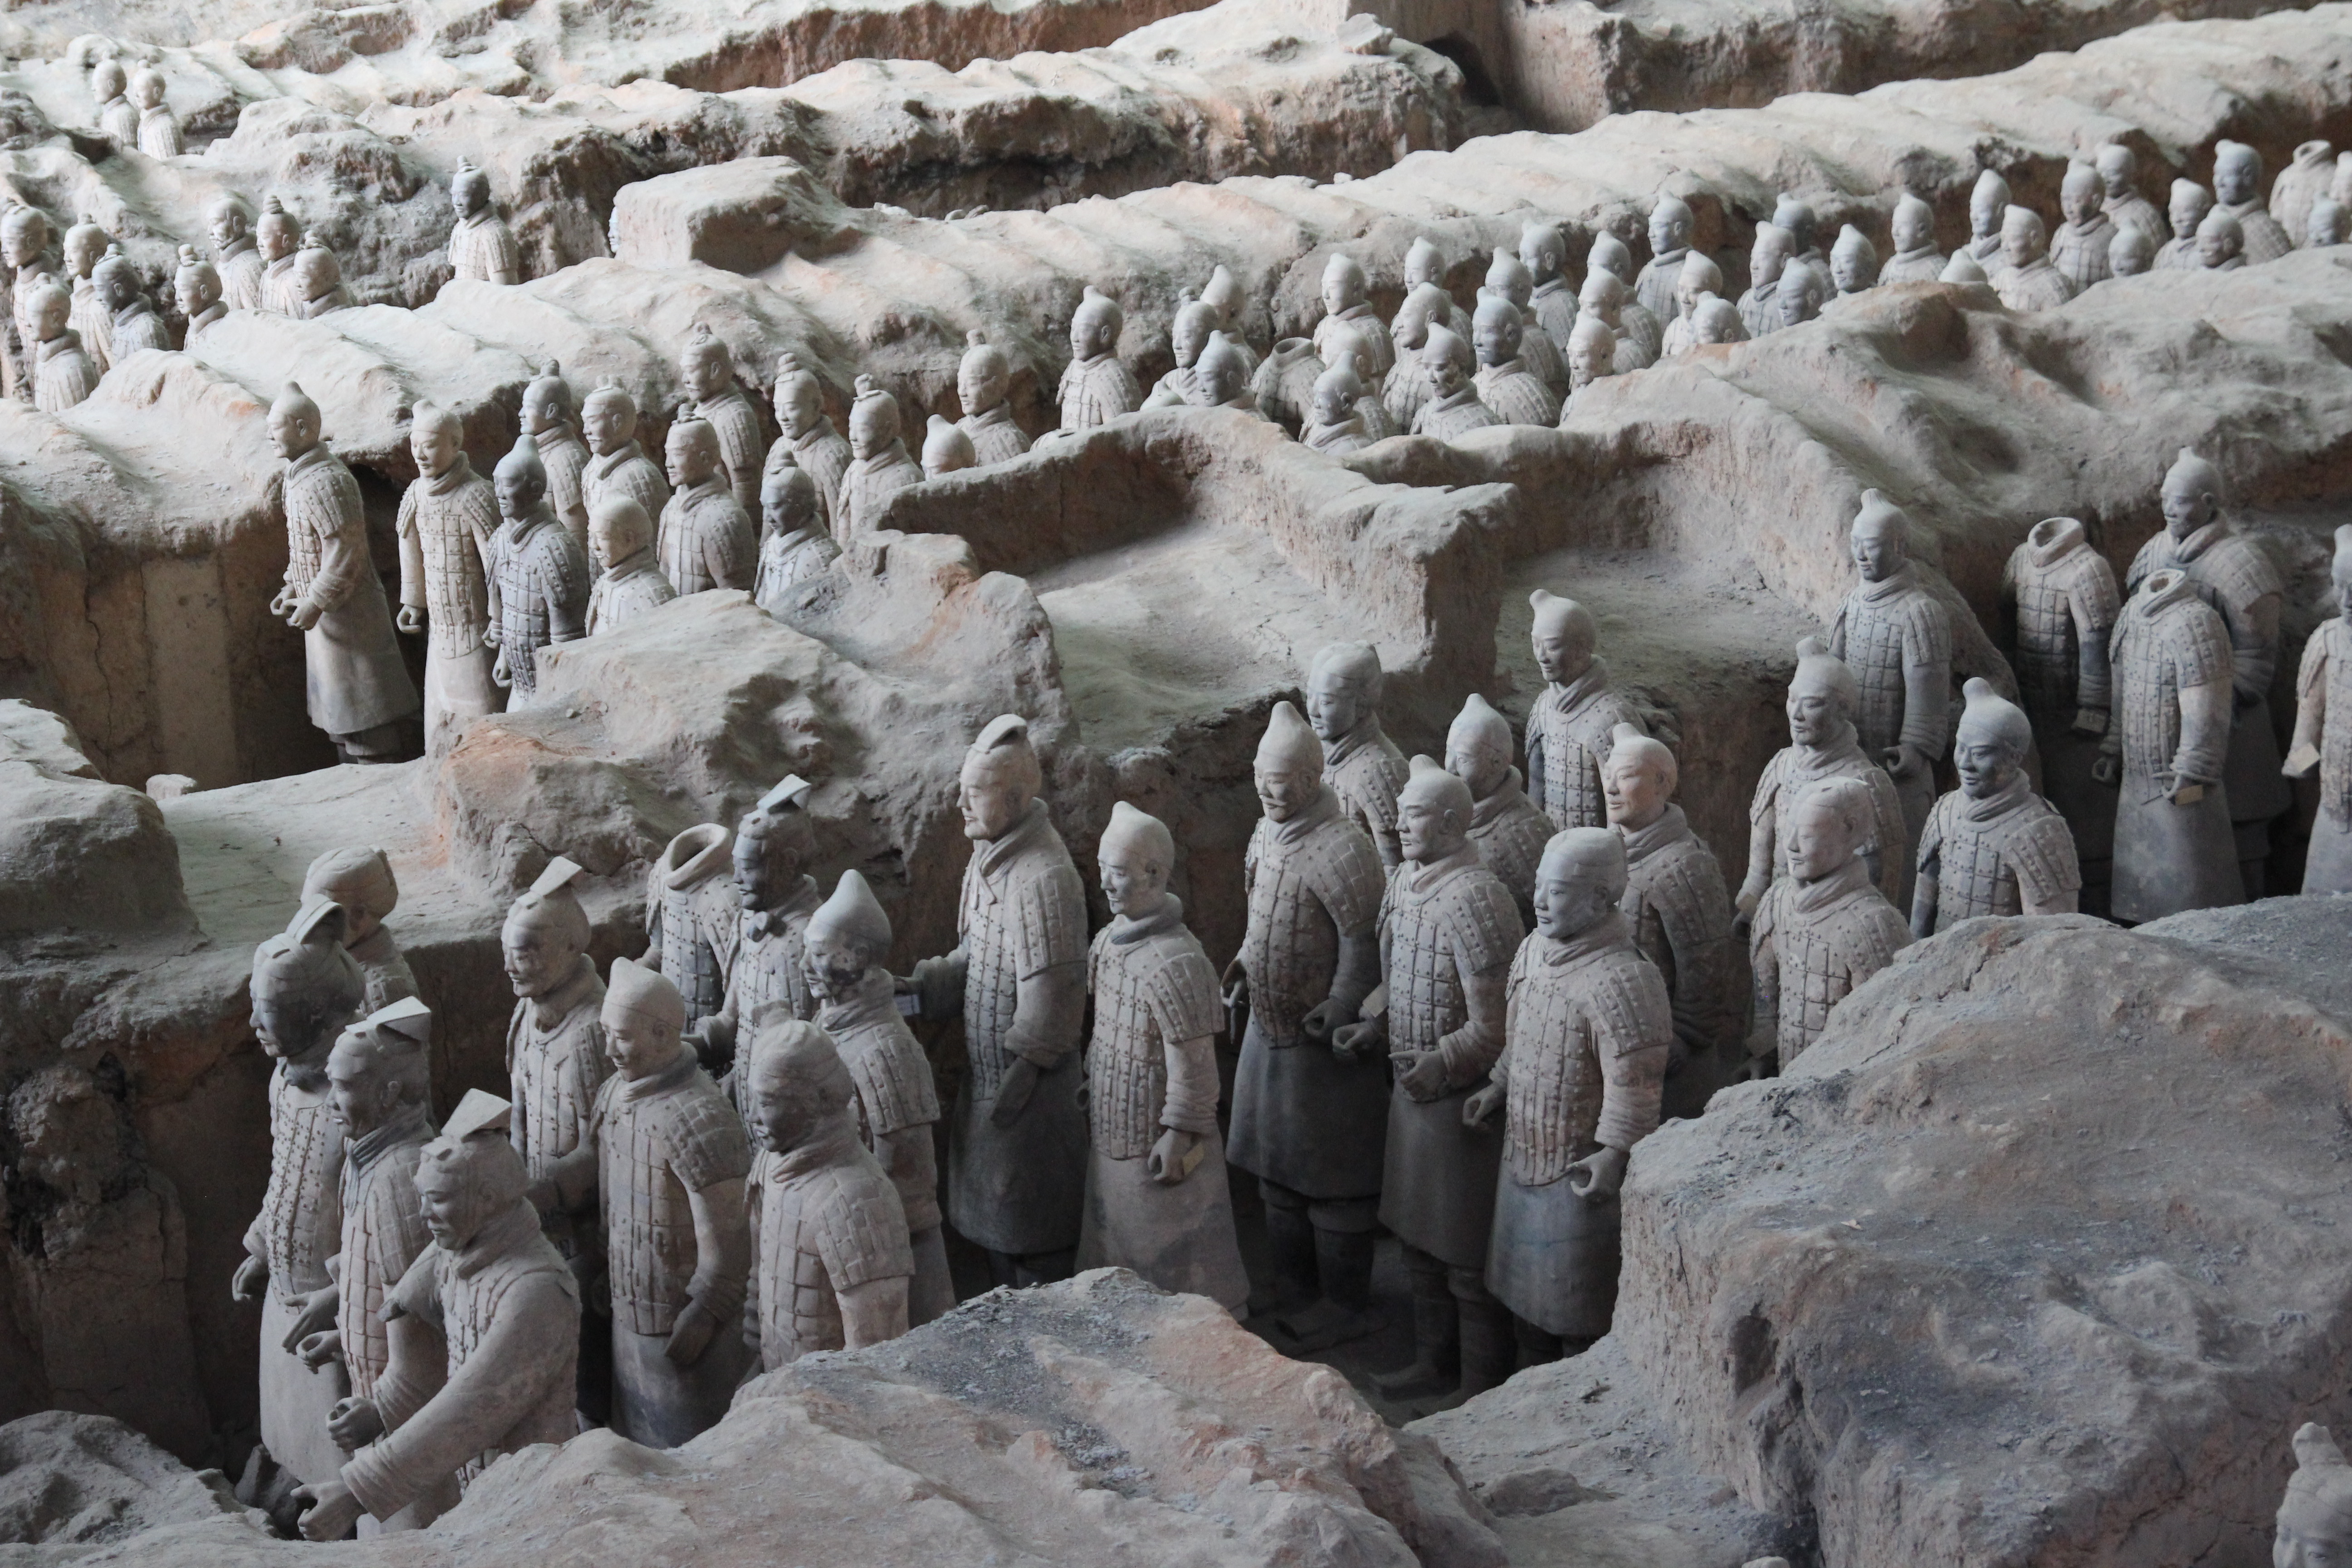 A visit to the terracotta army